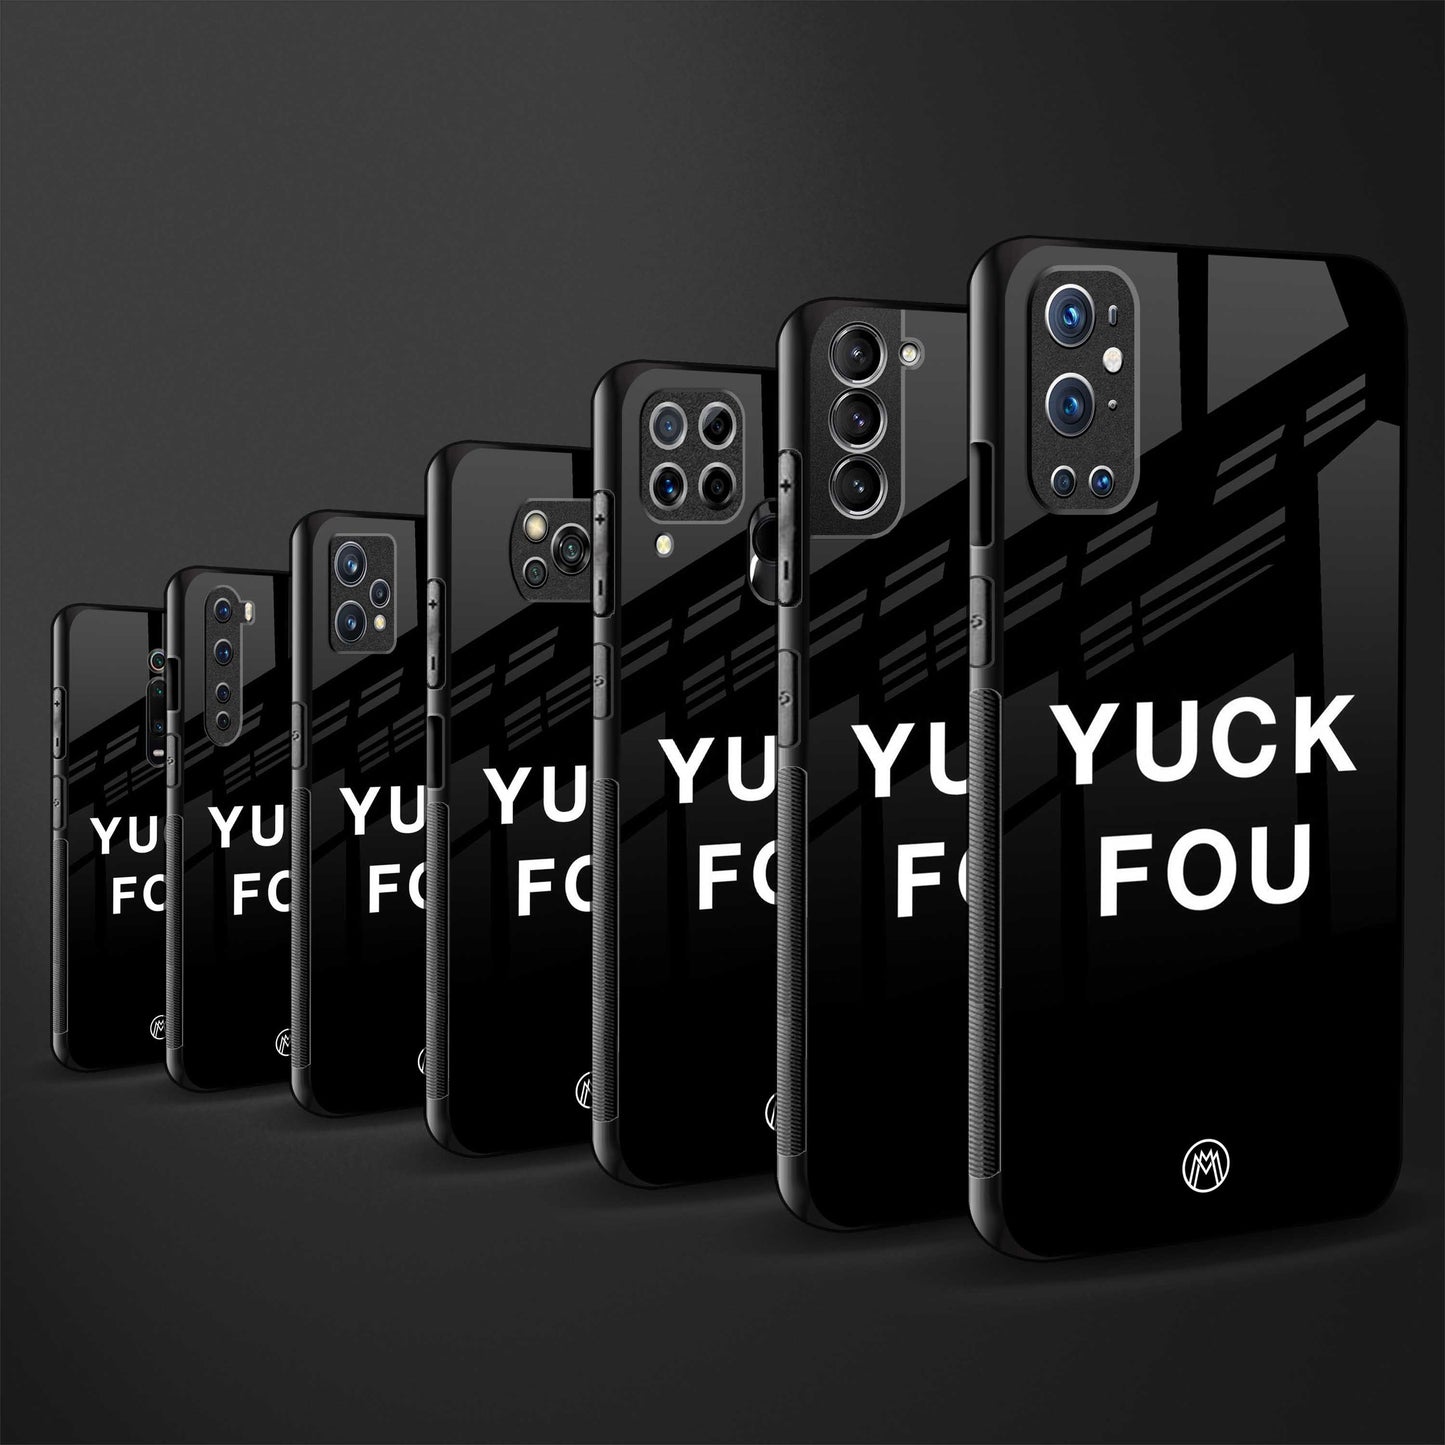 yuck fou glass case for samsung galaxy s9 plus image-3